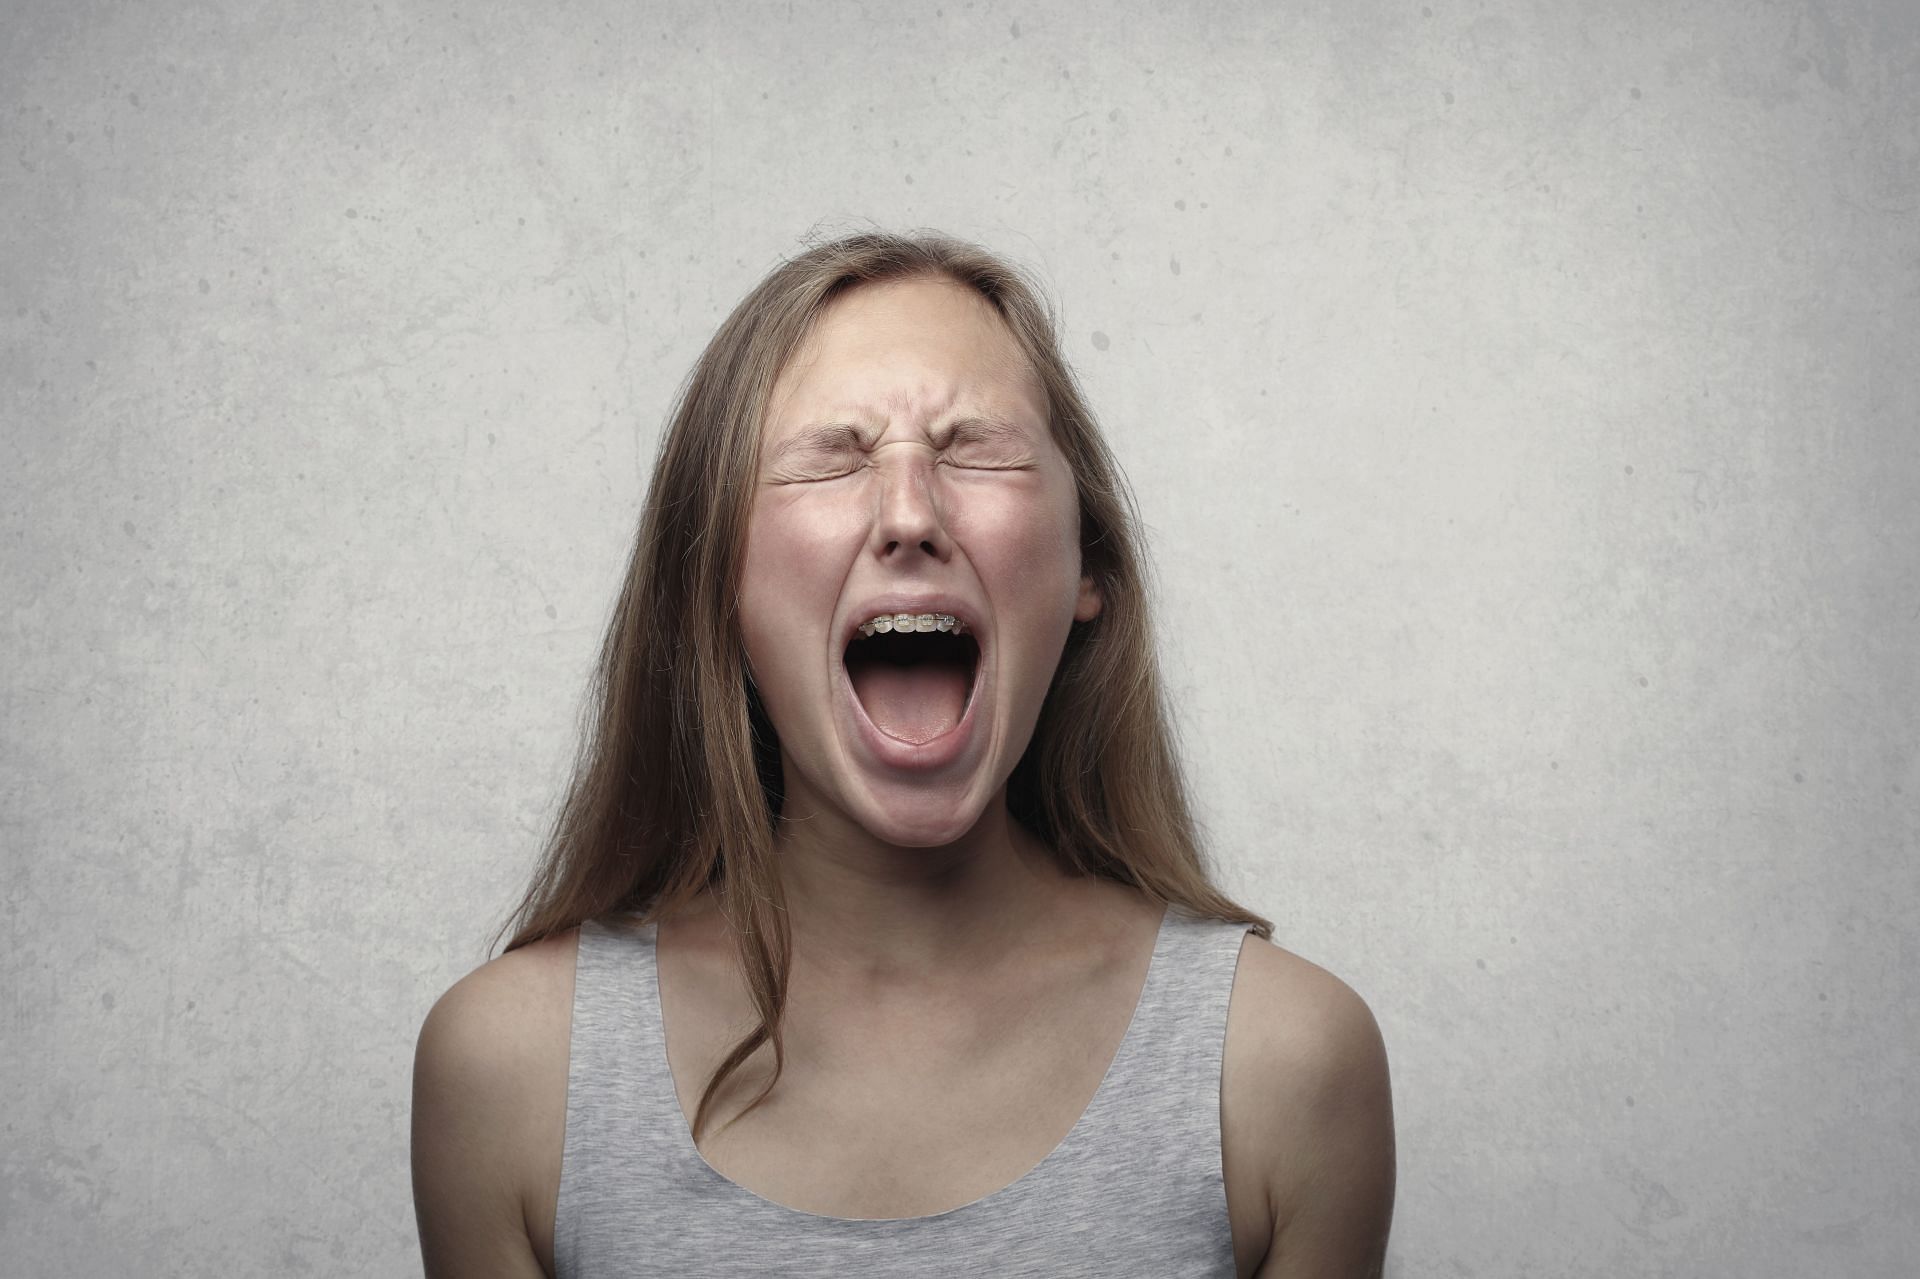 What do you do when you feel angry? (Image via Pexels/Andrea Piacquadio)